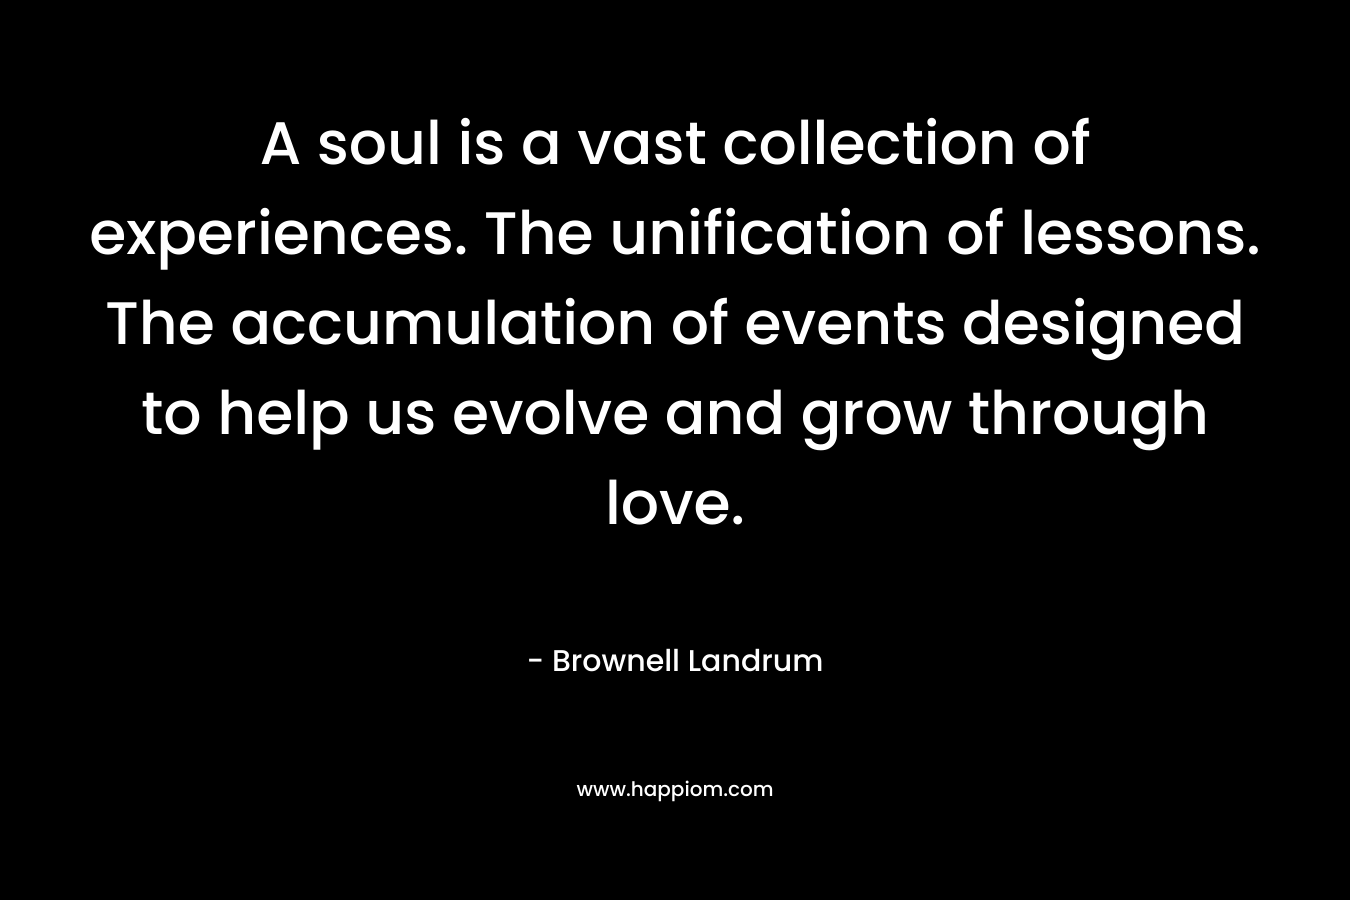 A soul is a vast collection of experiences. The unification of lessons. The accumulation of events designed to help us evolve and grow through love.